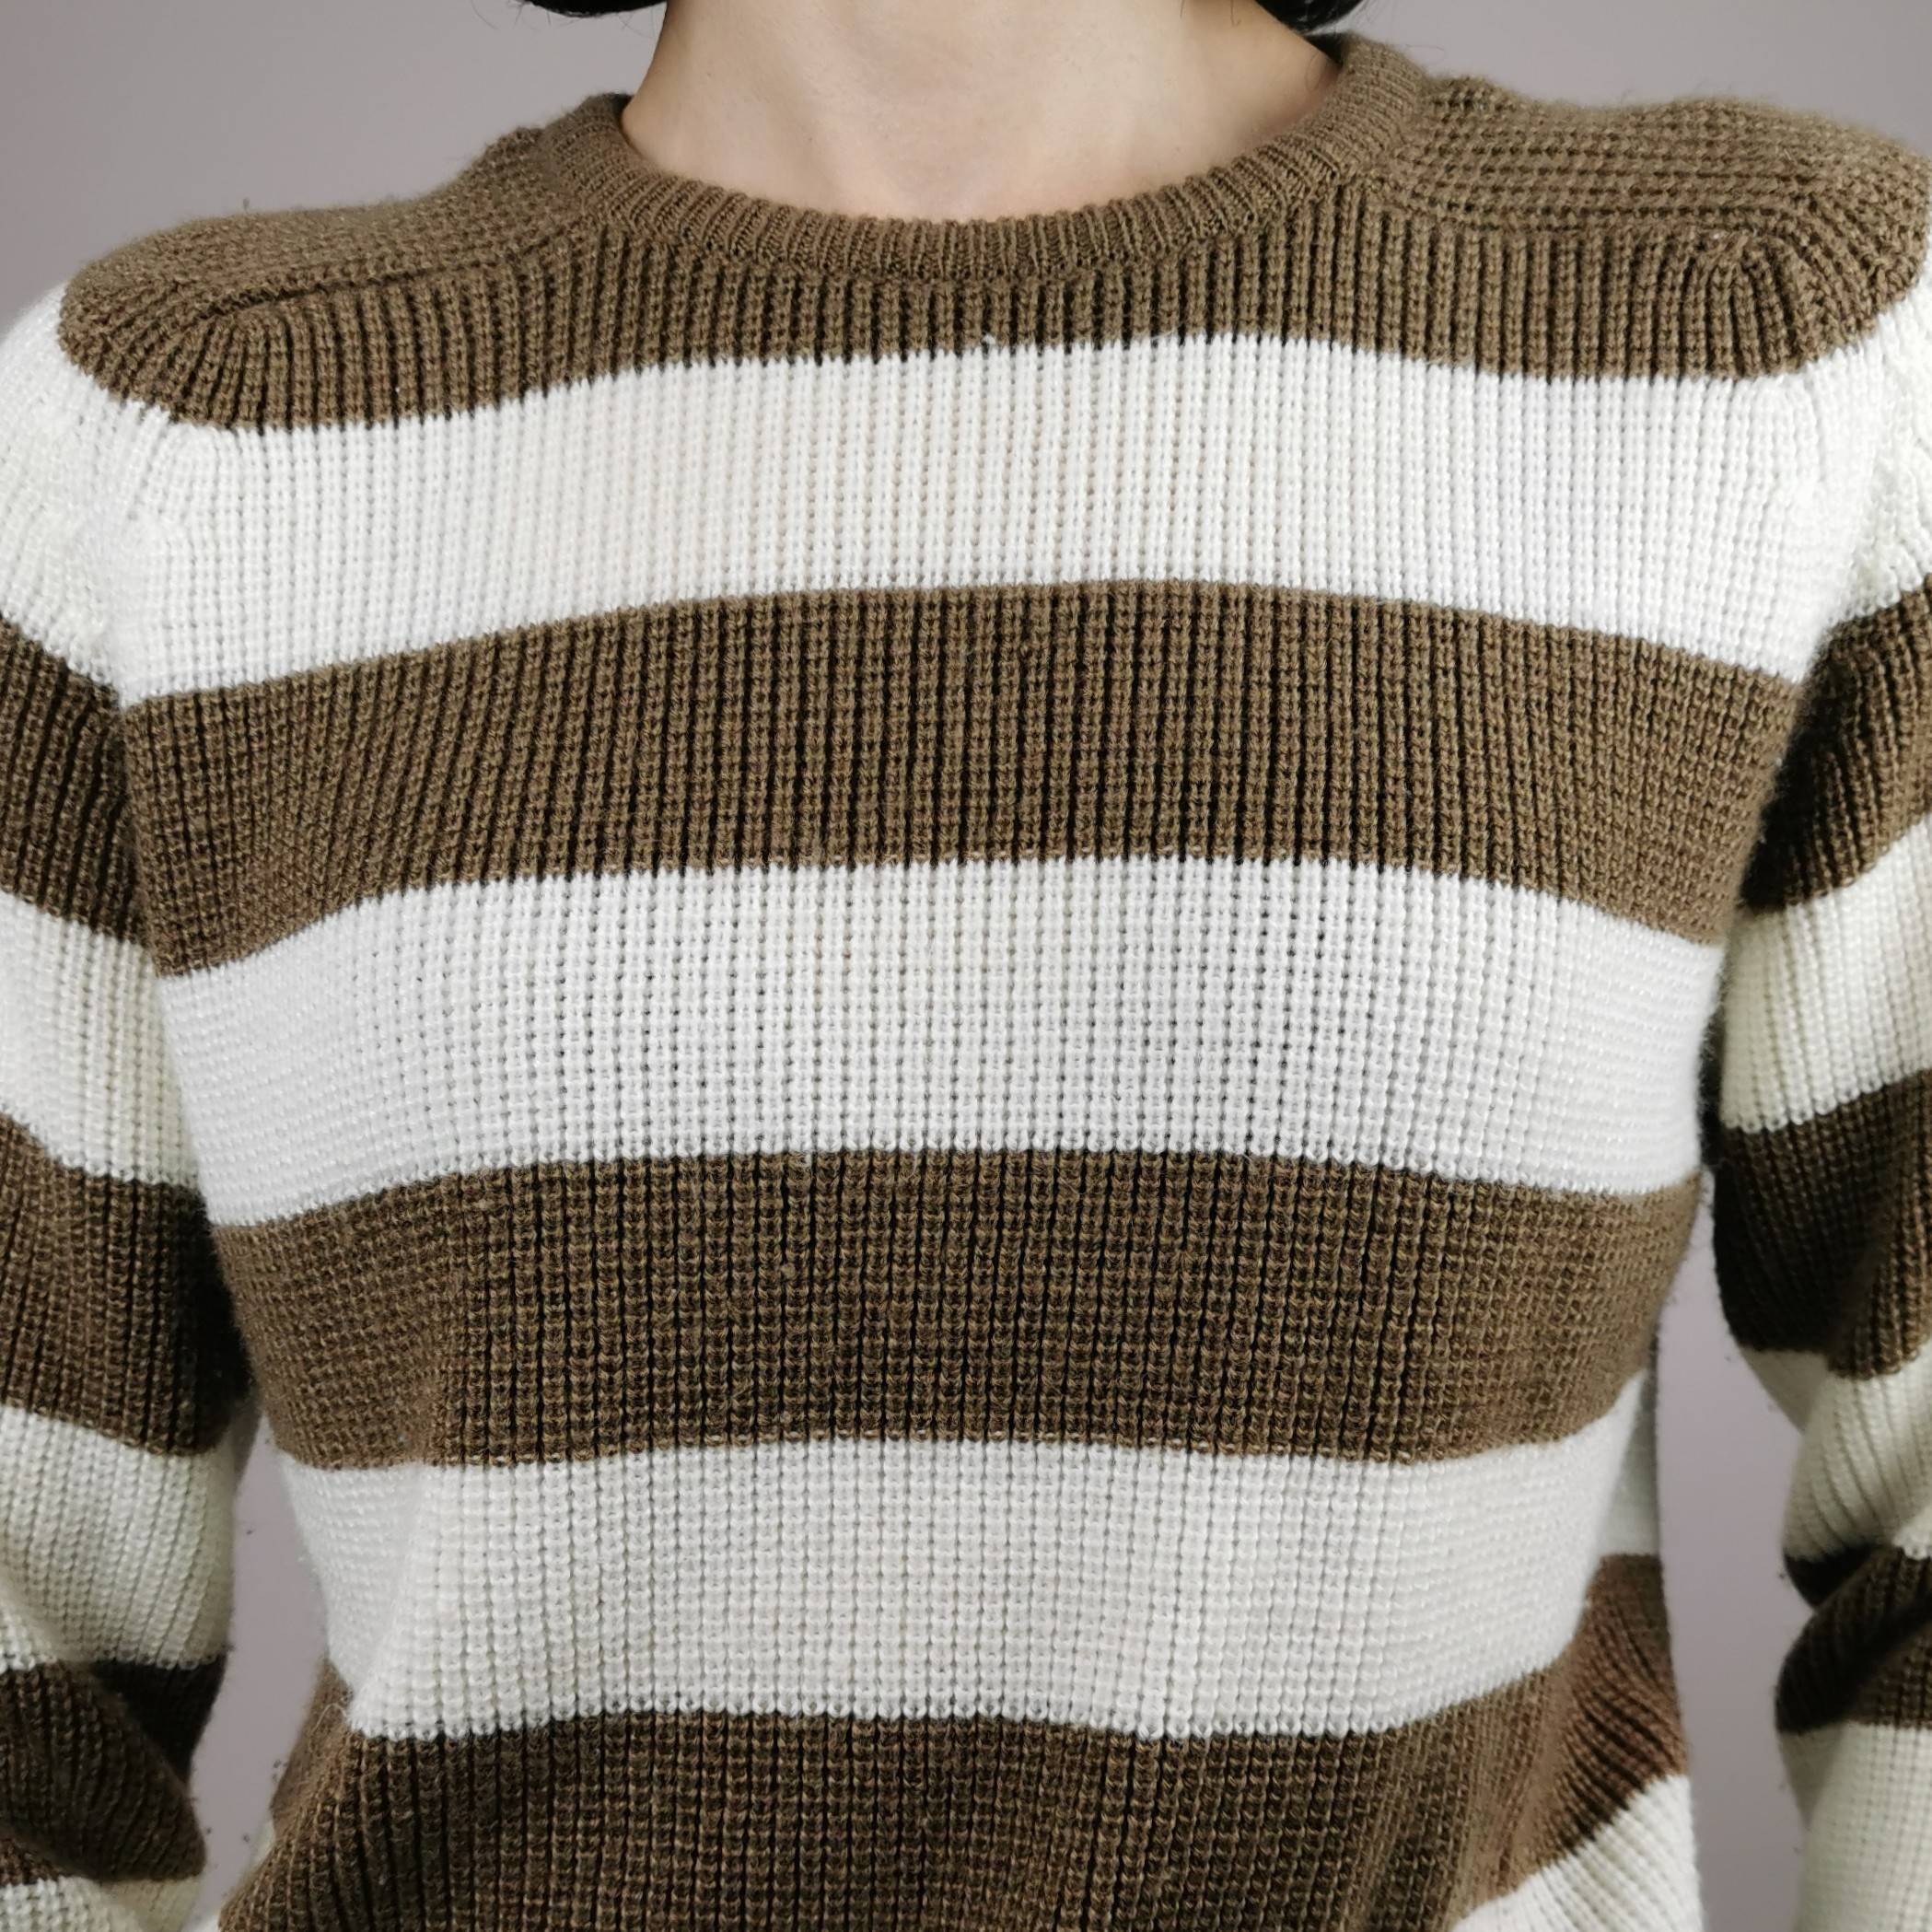 Medium vintage brown and white striped cozy knit sweater | Etsy